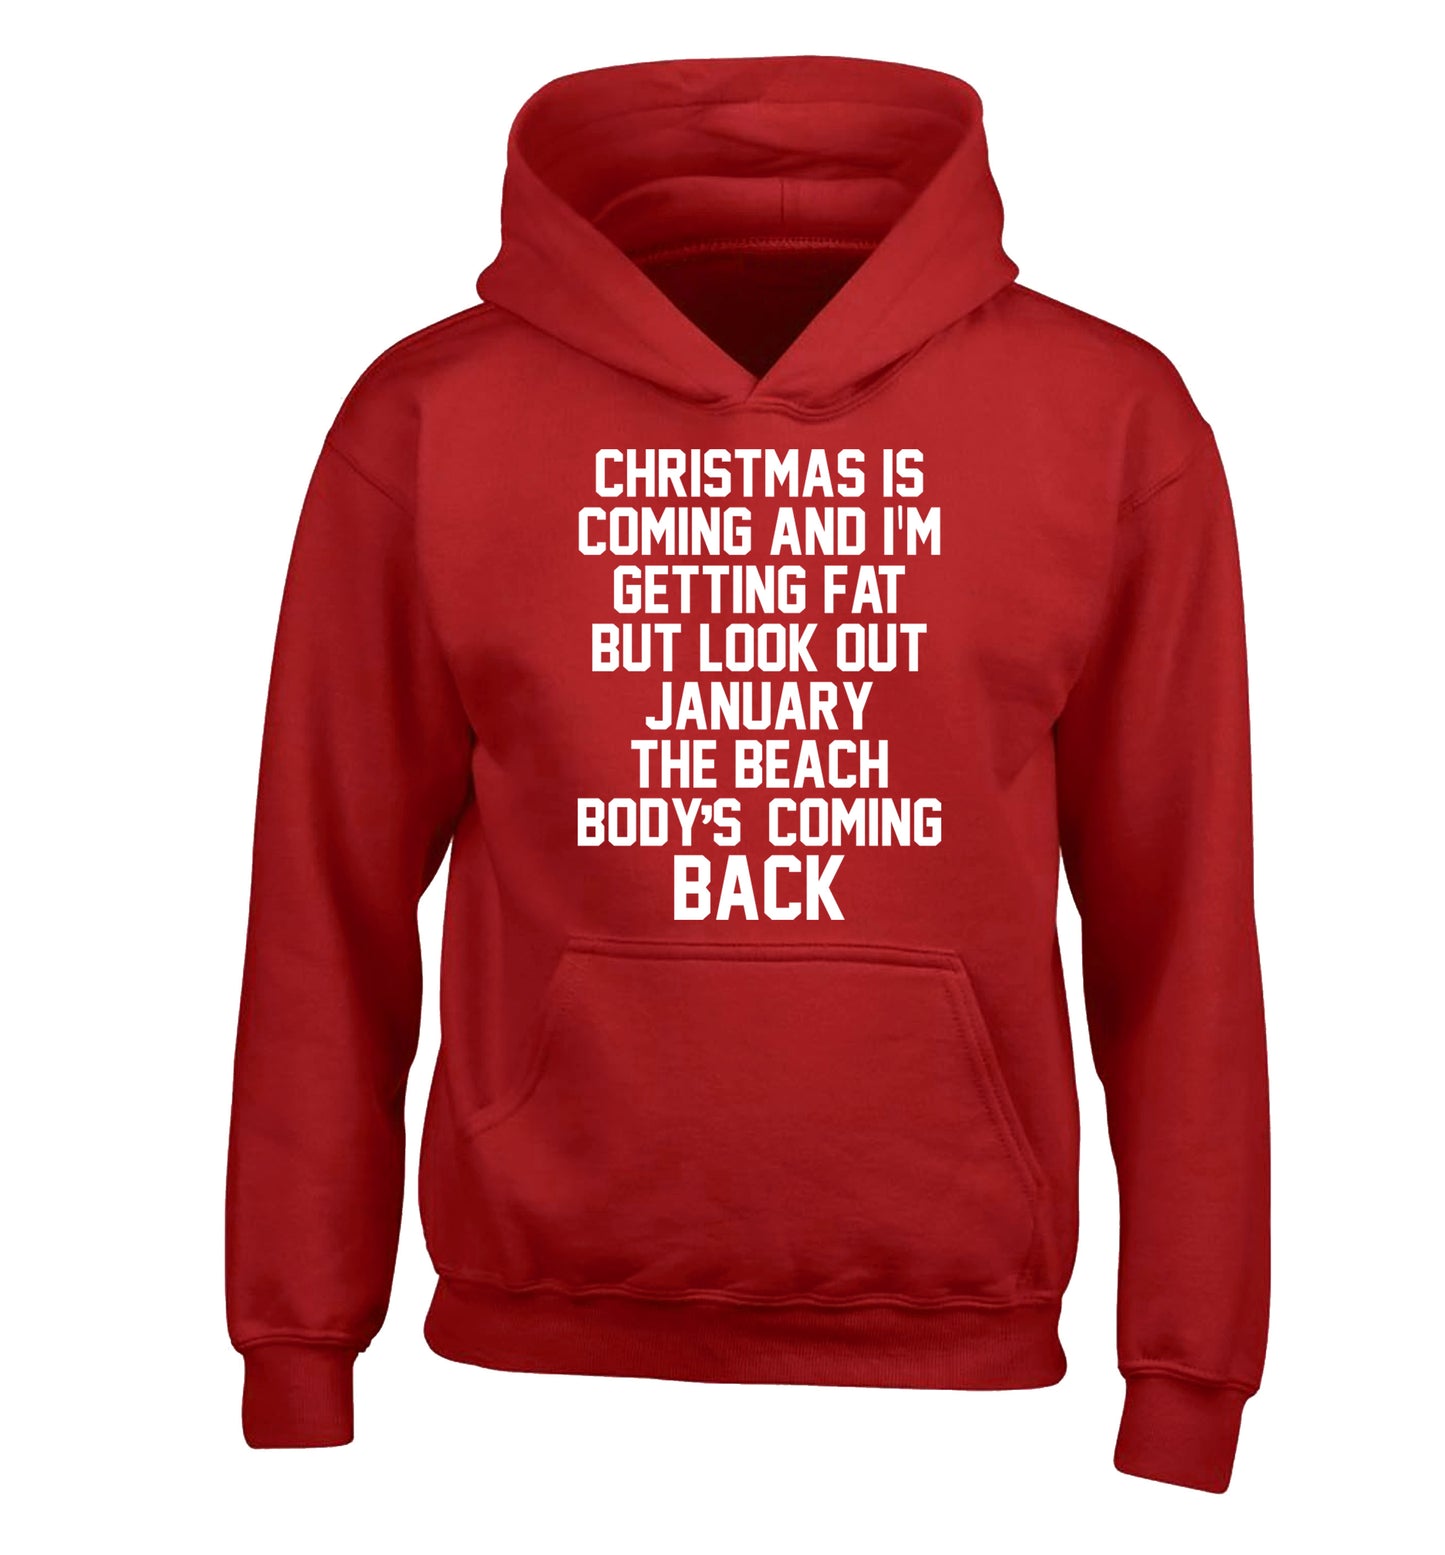 Christmas is coming and I'm getting fat but look out January the beach body's coming back! children's red hoodie 12-14 Years